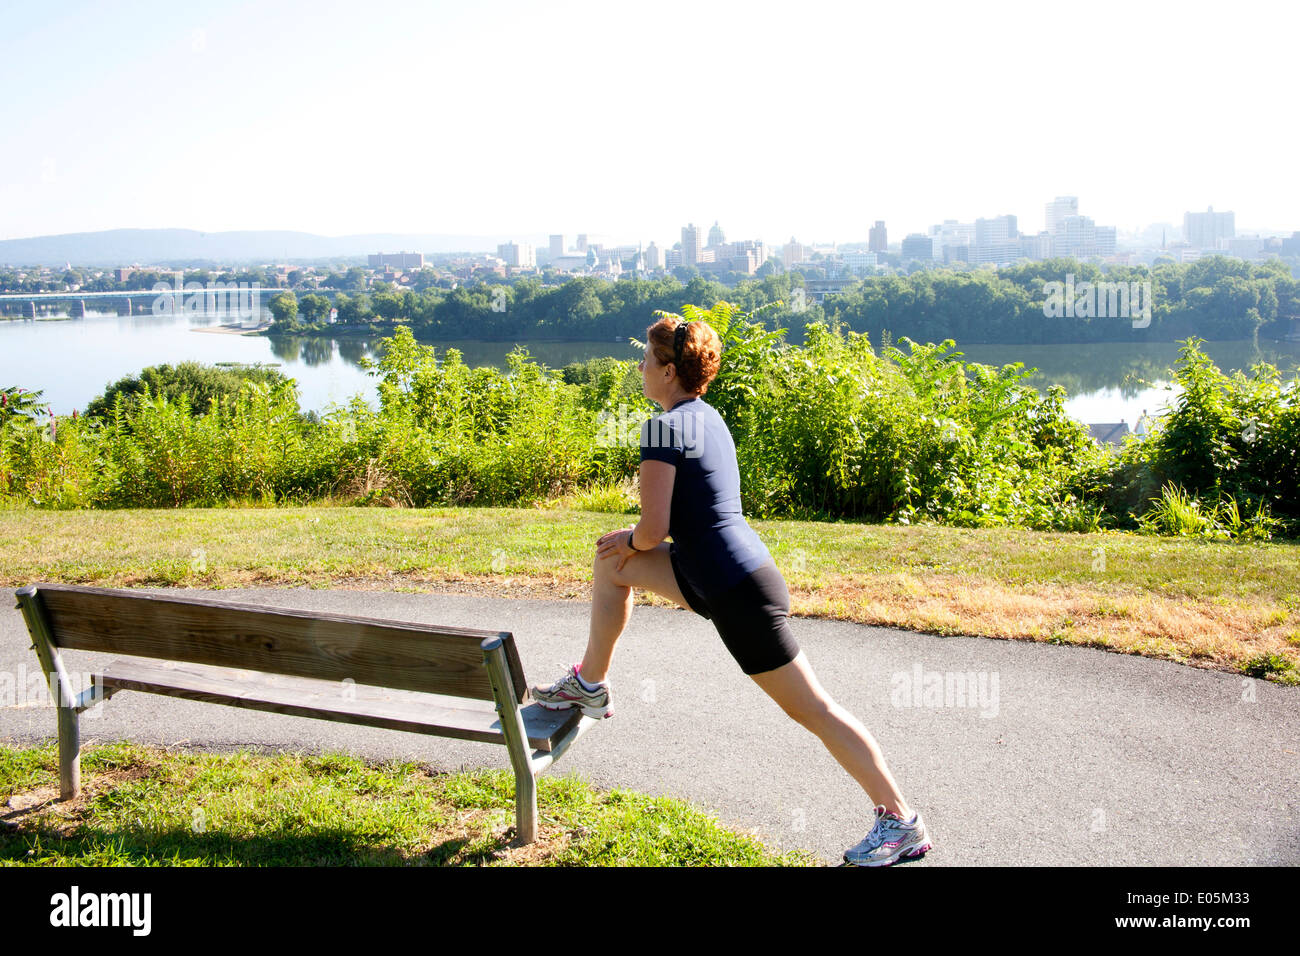 Female jogger stretching on a bench before running along a path overlooking  a riverview city skyline on a hazy, hot summer day Stock Photo - Alamy